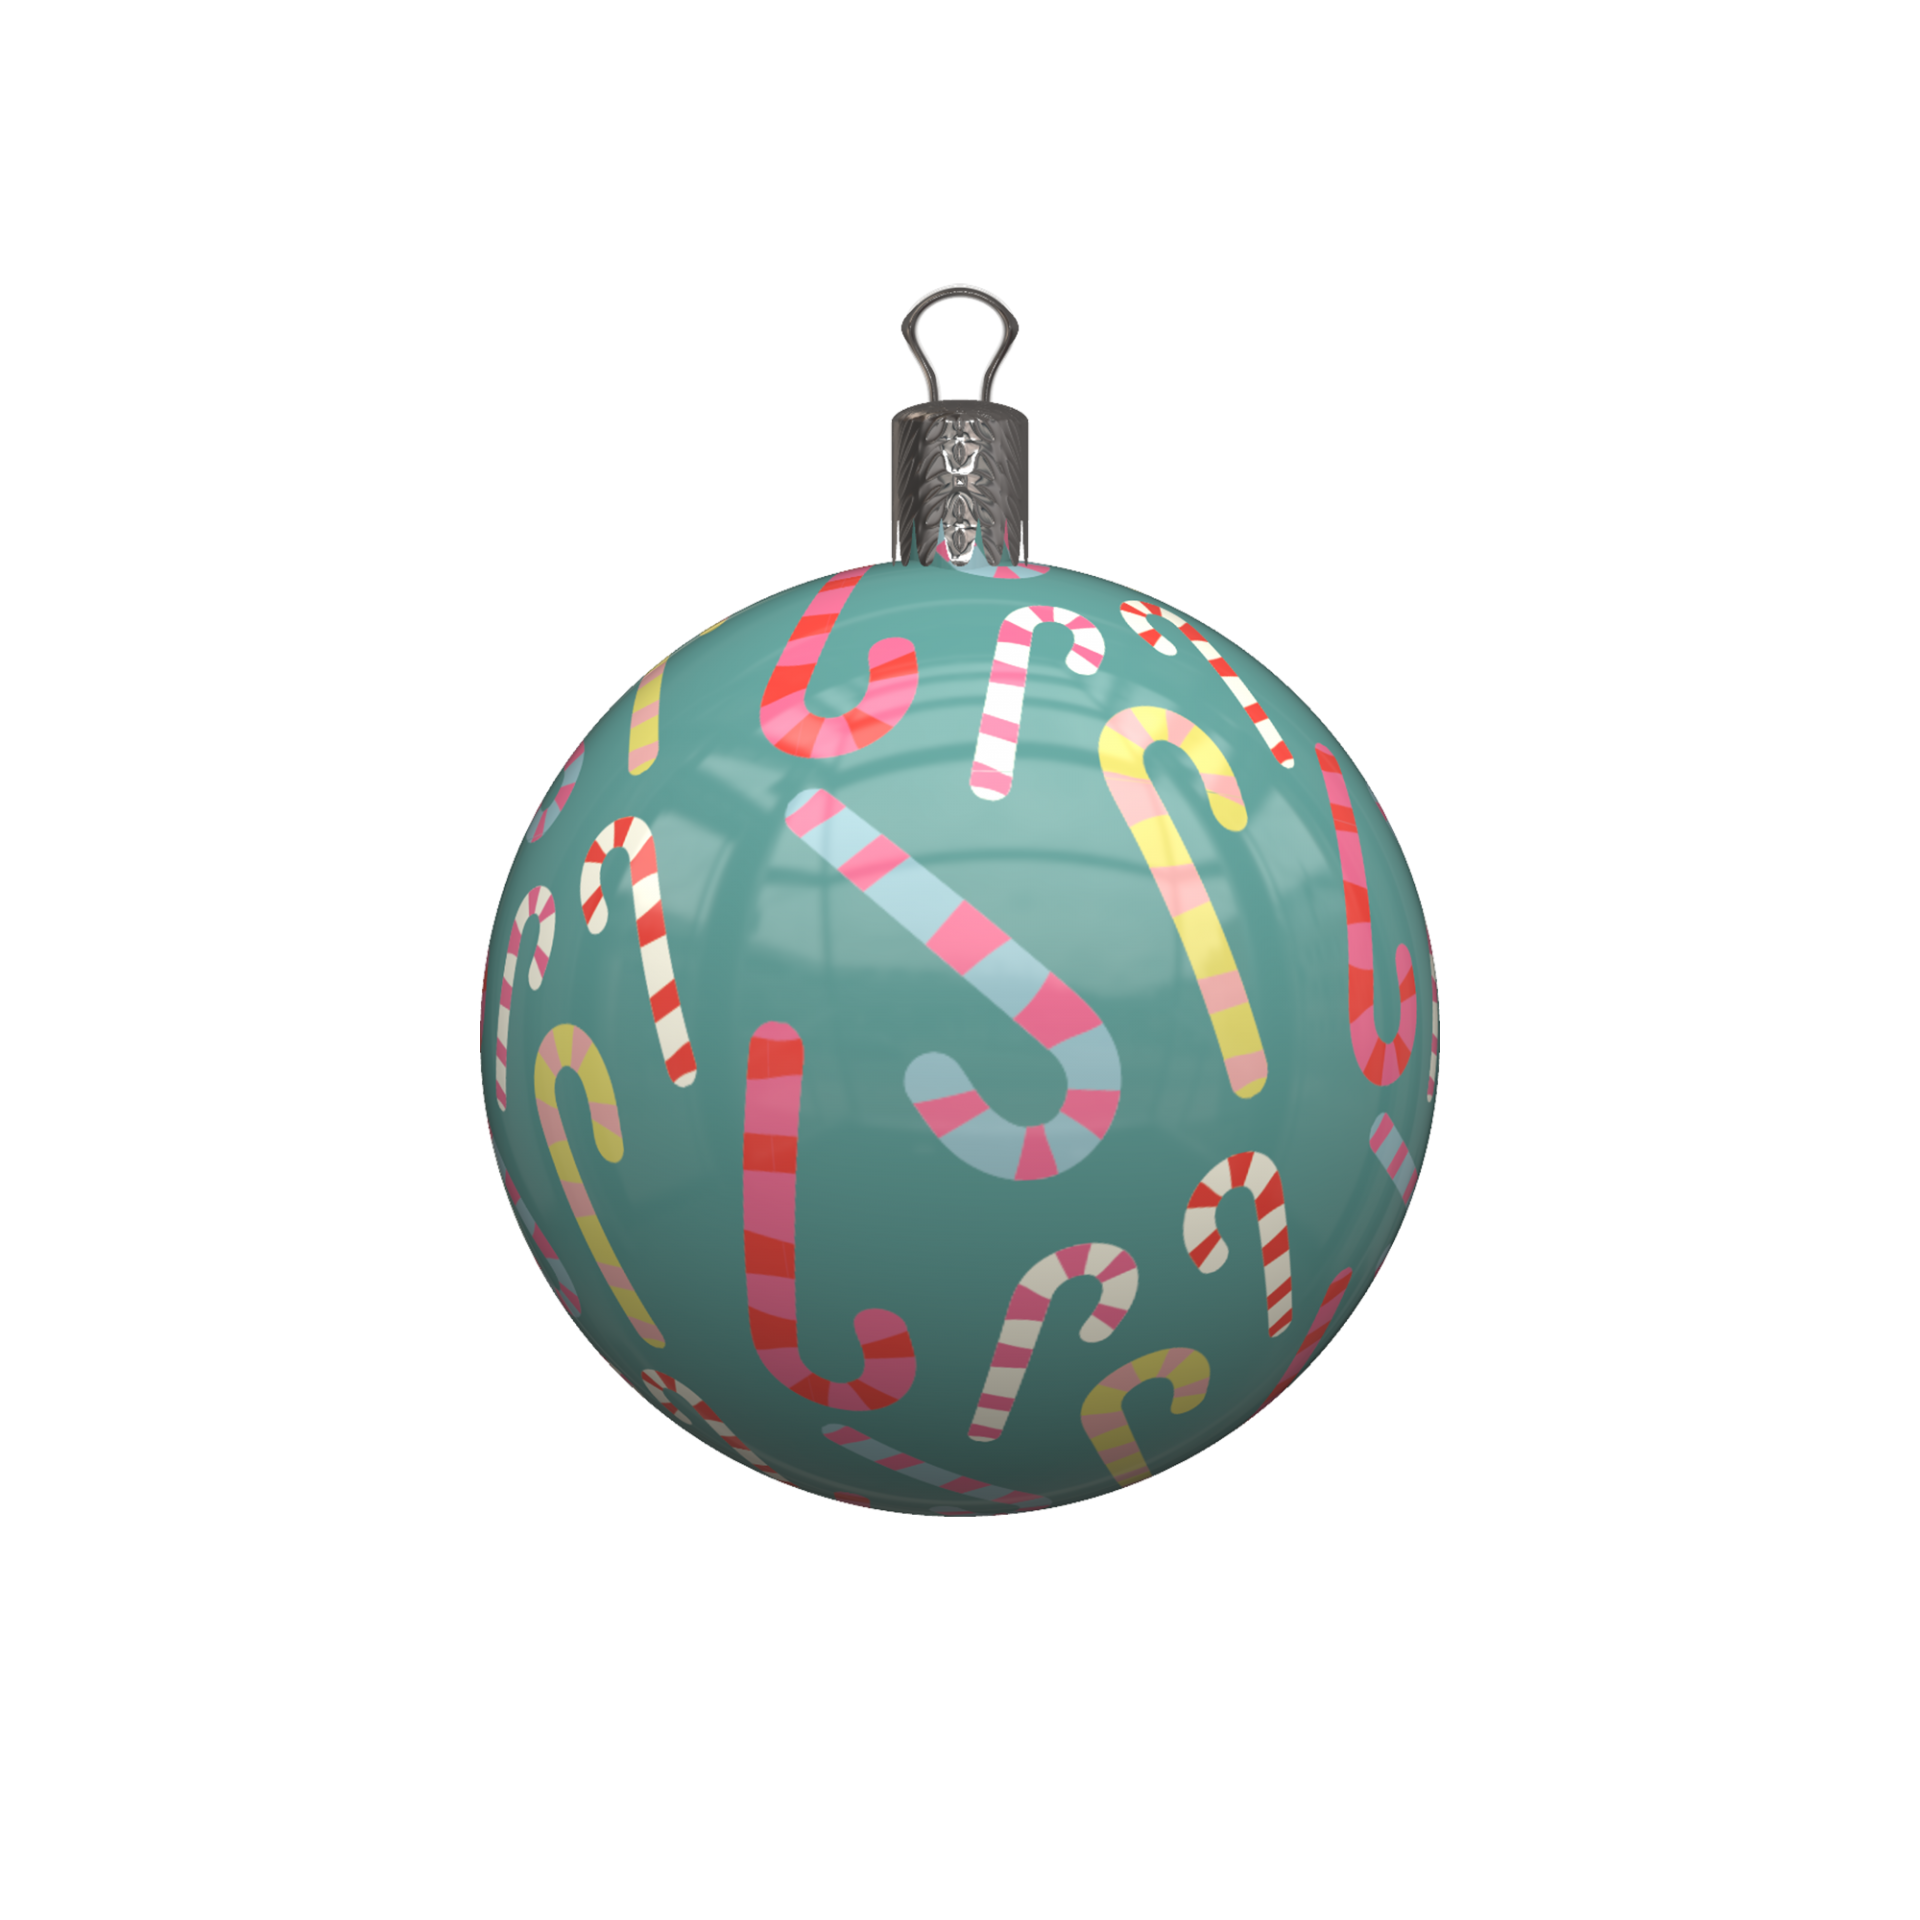 Blue Natal bauble PNG hd